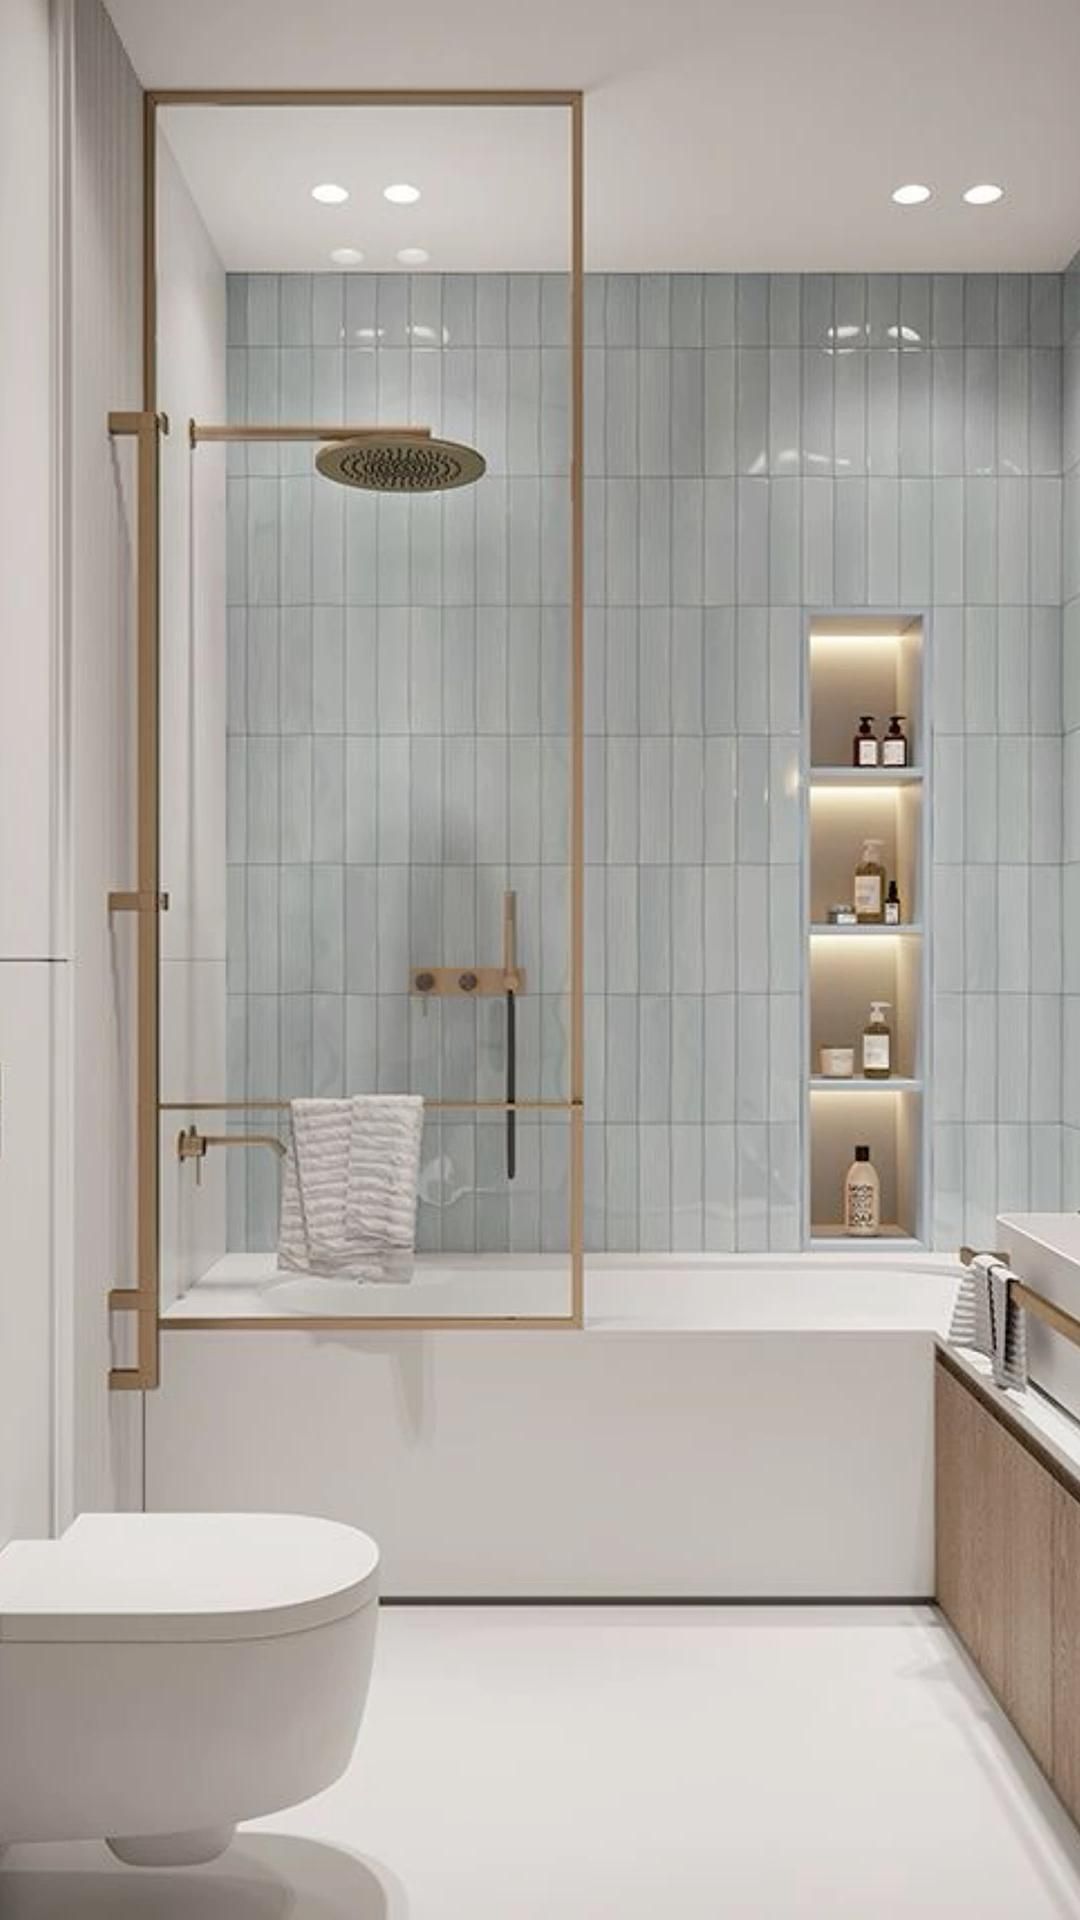 Maximizing Space: Stylish Bathroom Suites Perfect for Compact Spaces